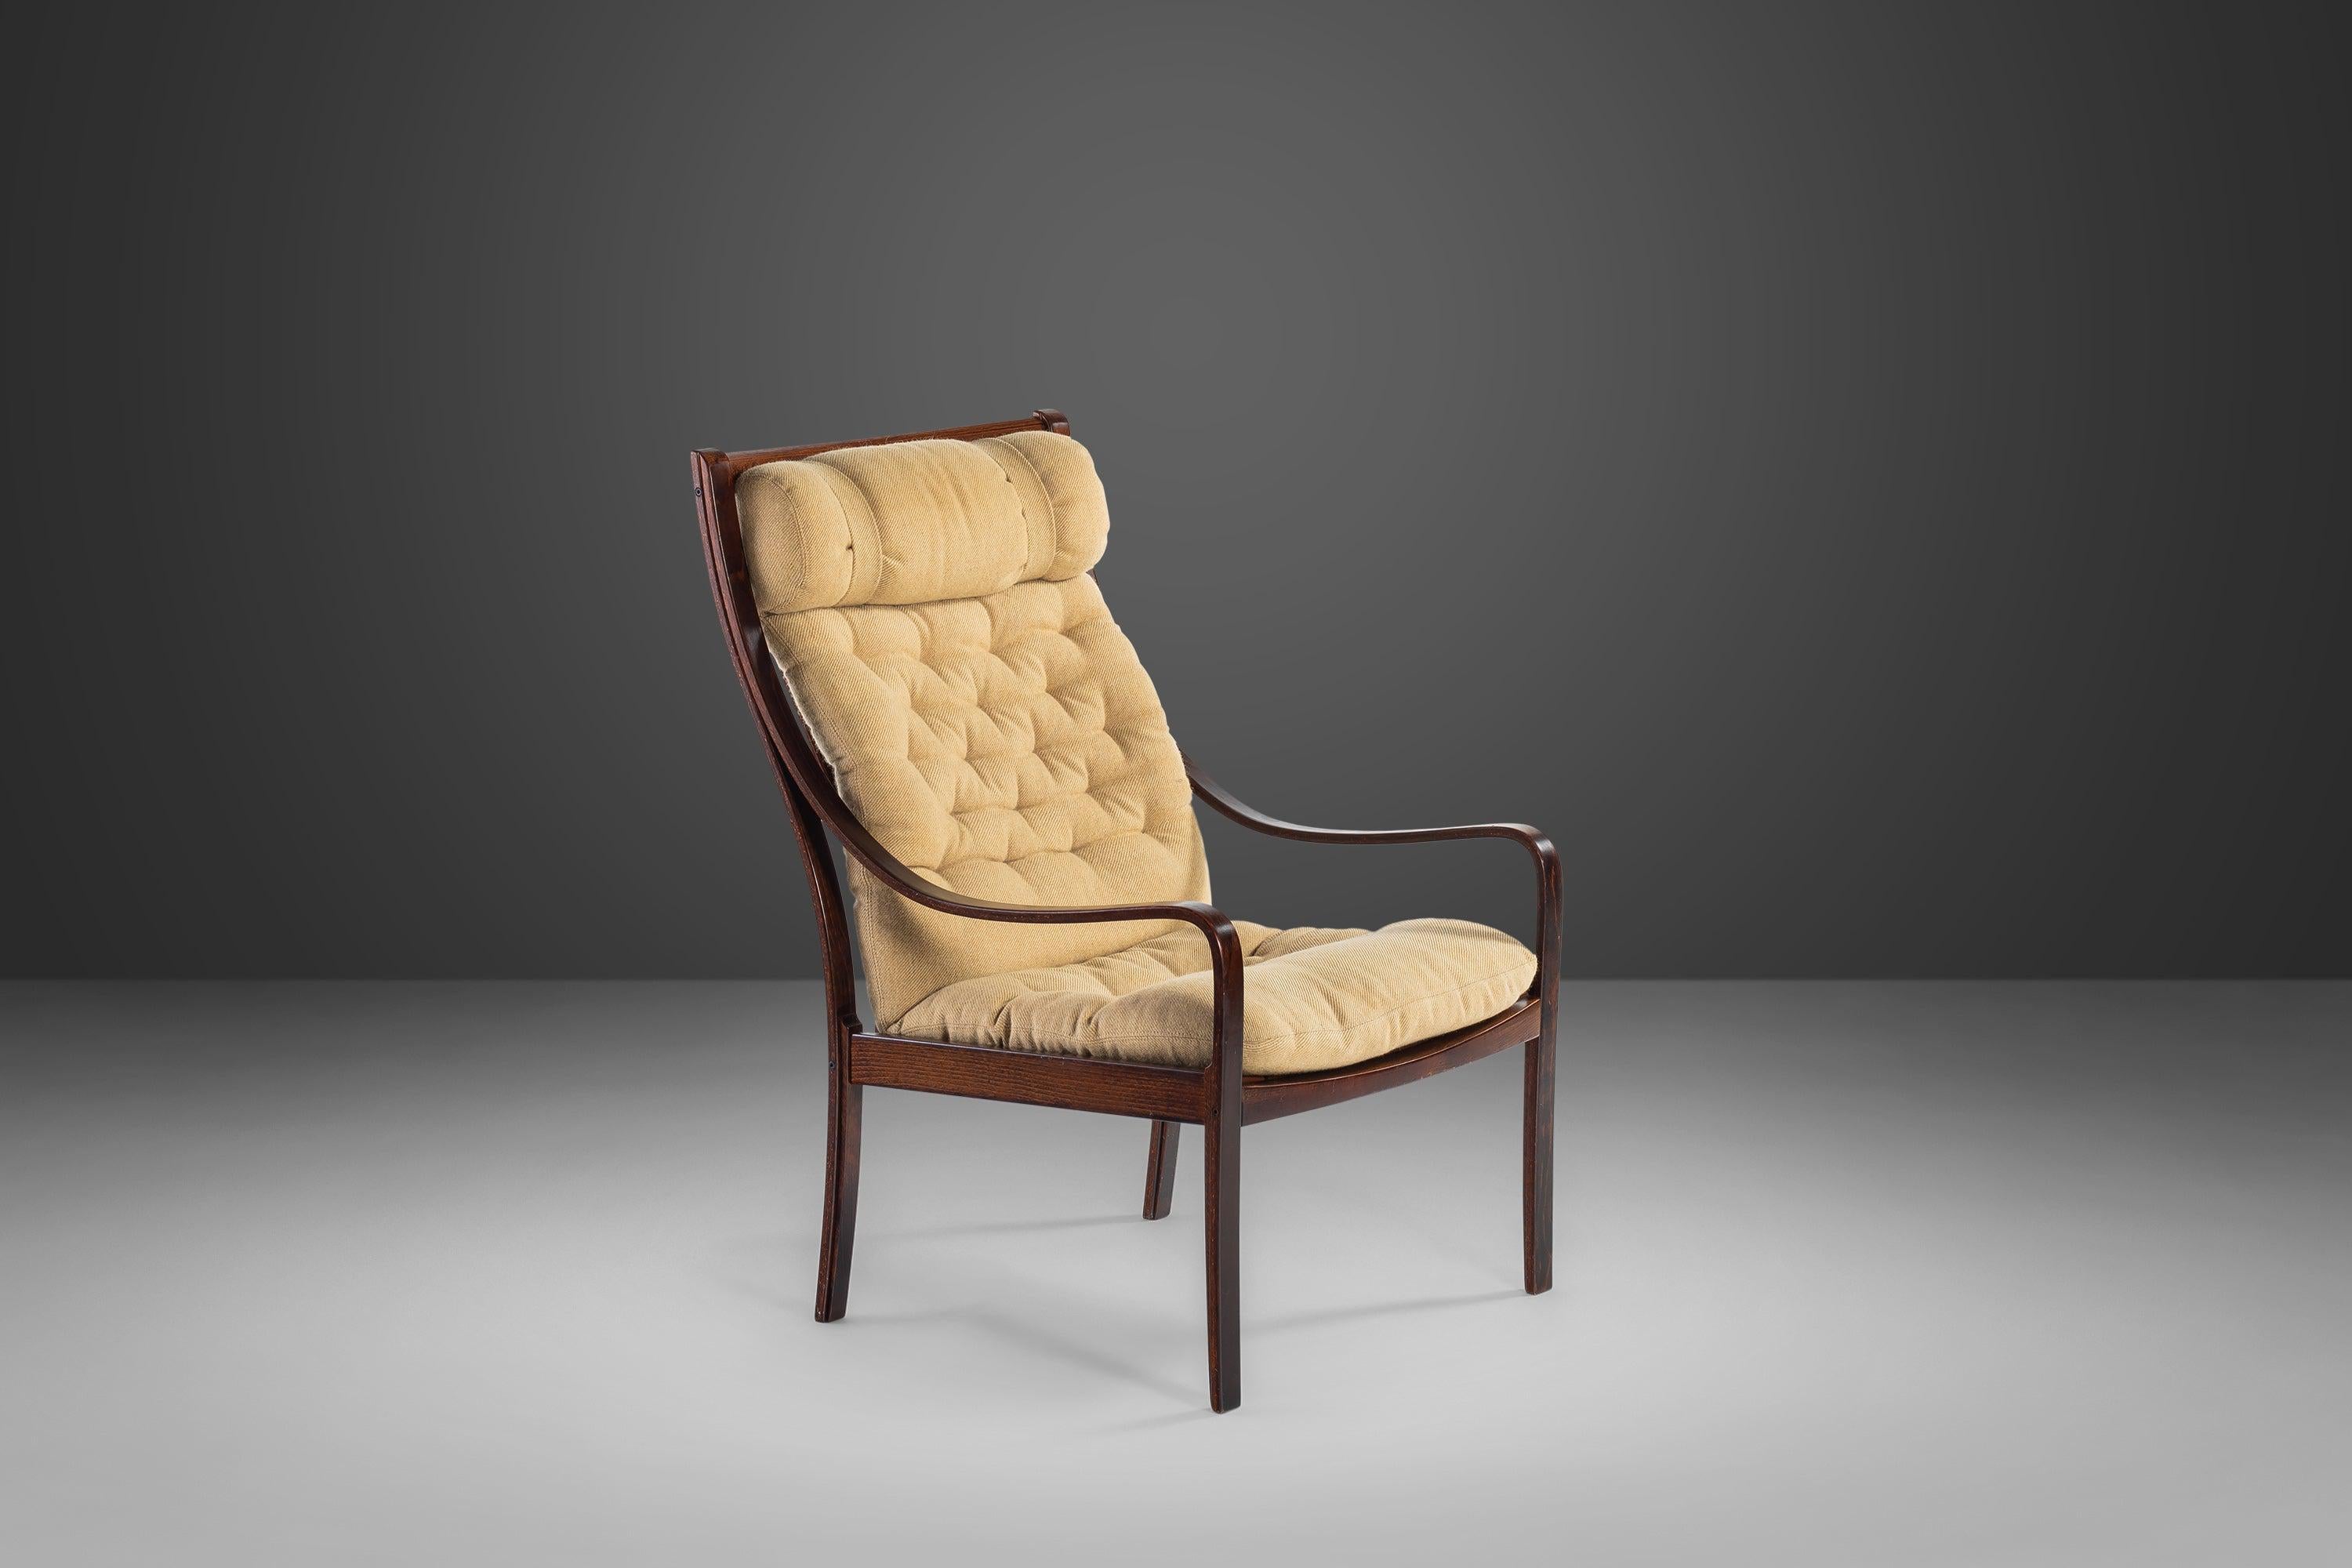 Bentwood Lounge Chair w/ Ottoman by Fredrik A. Kayser for Vatne, Denmark, 1960s In Good Condition For Sale In Deland, FL